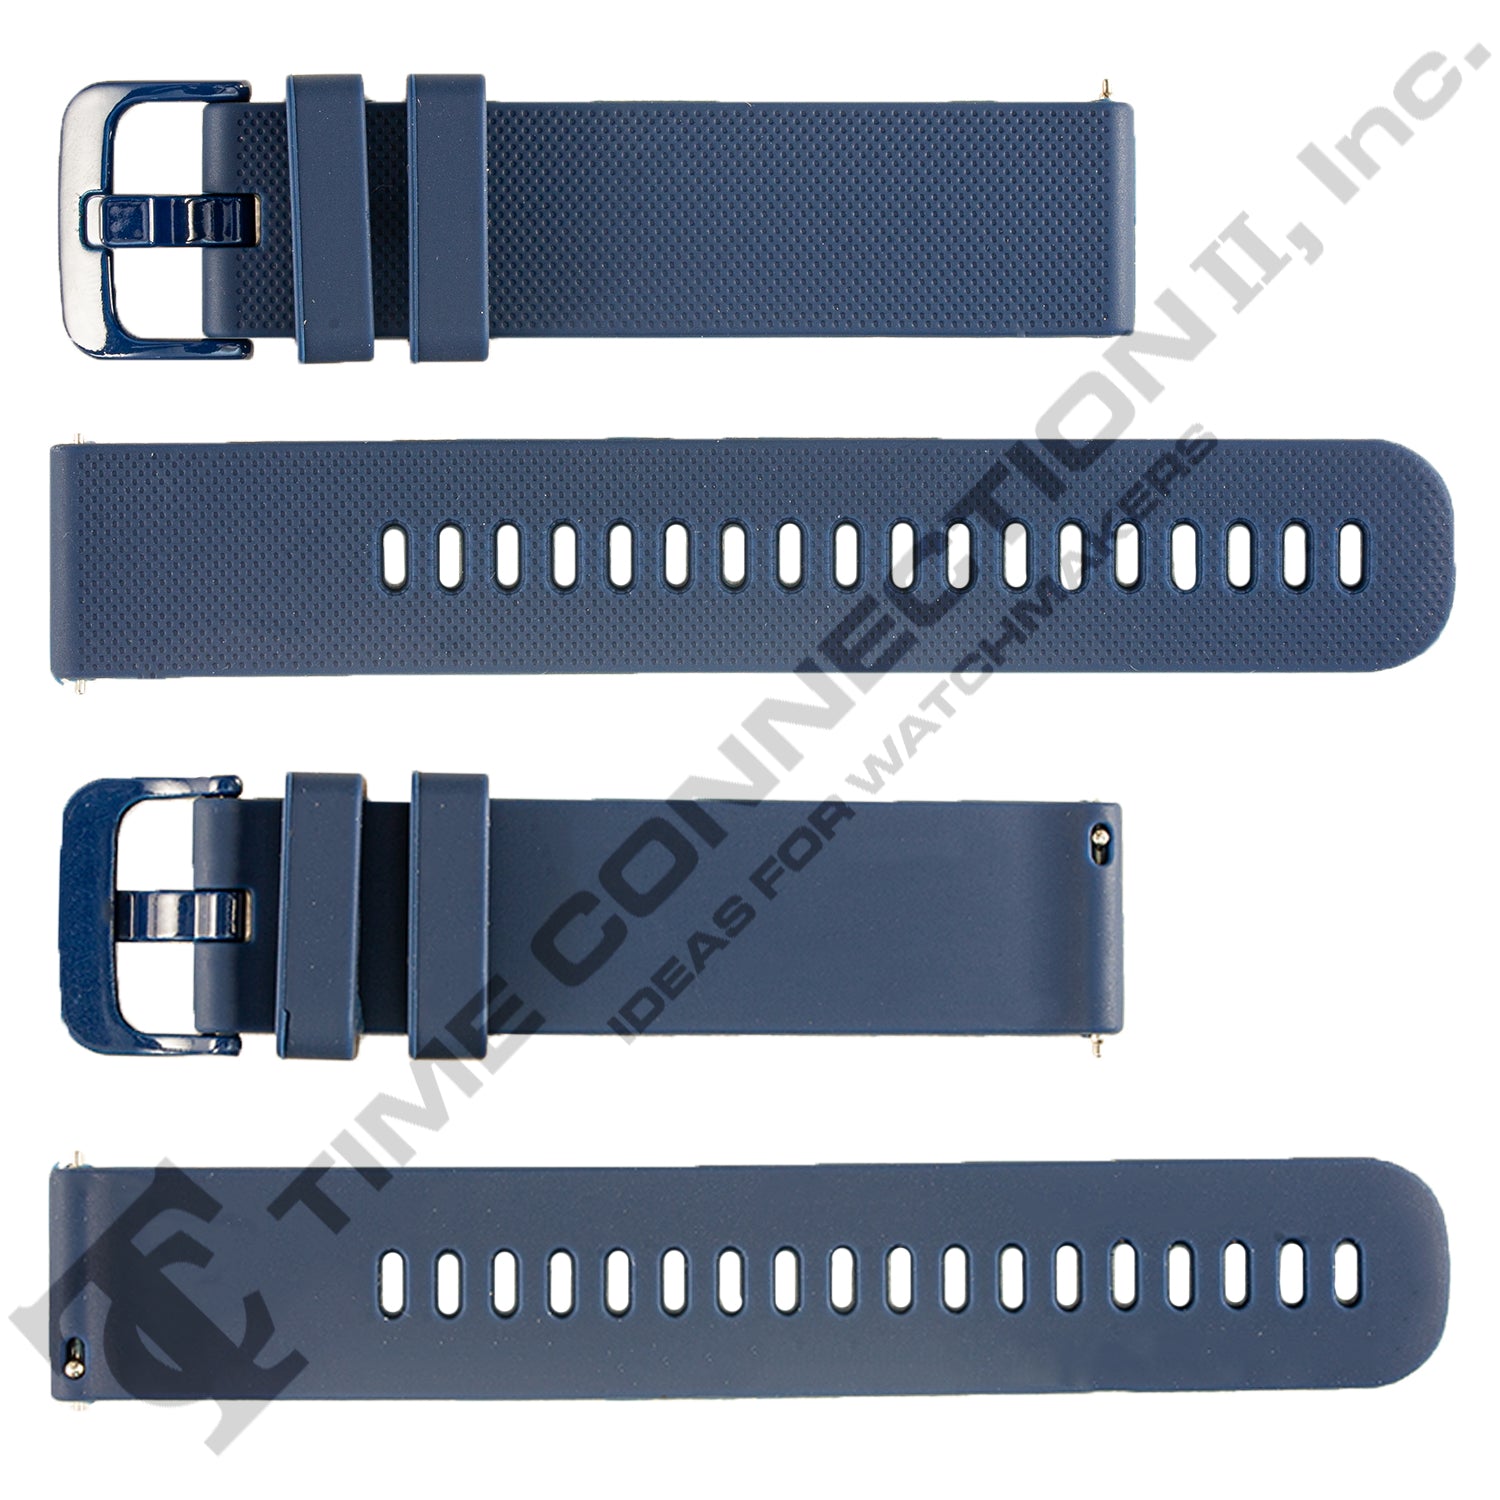 Genuine Silicone Quick Release Fashion Straps for Smart Watches (20-22mm)